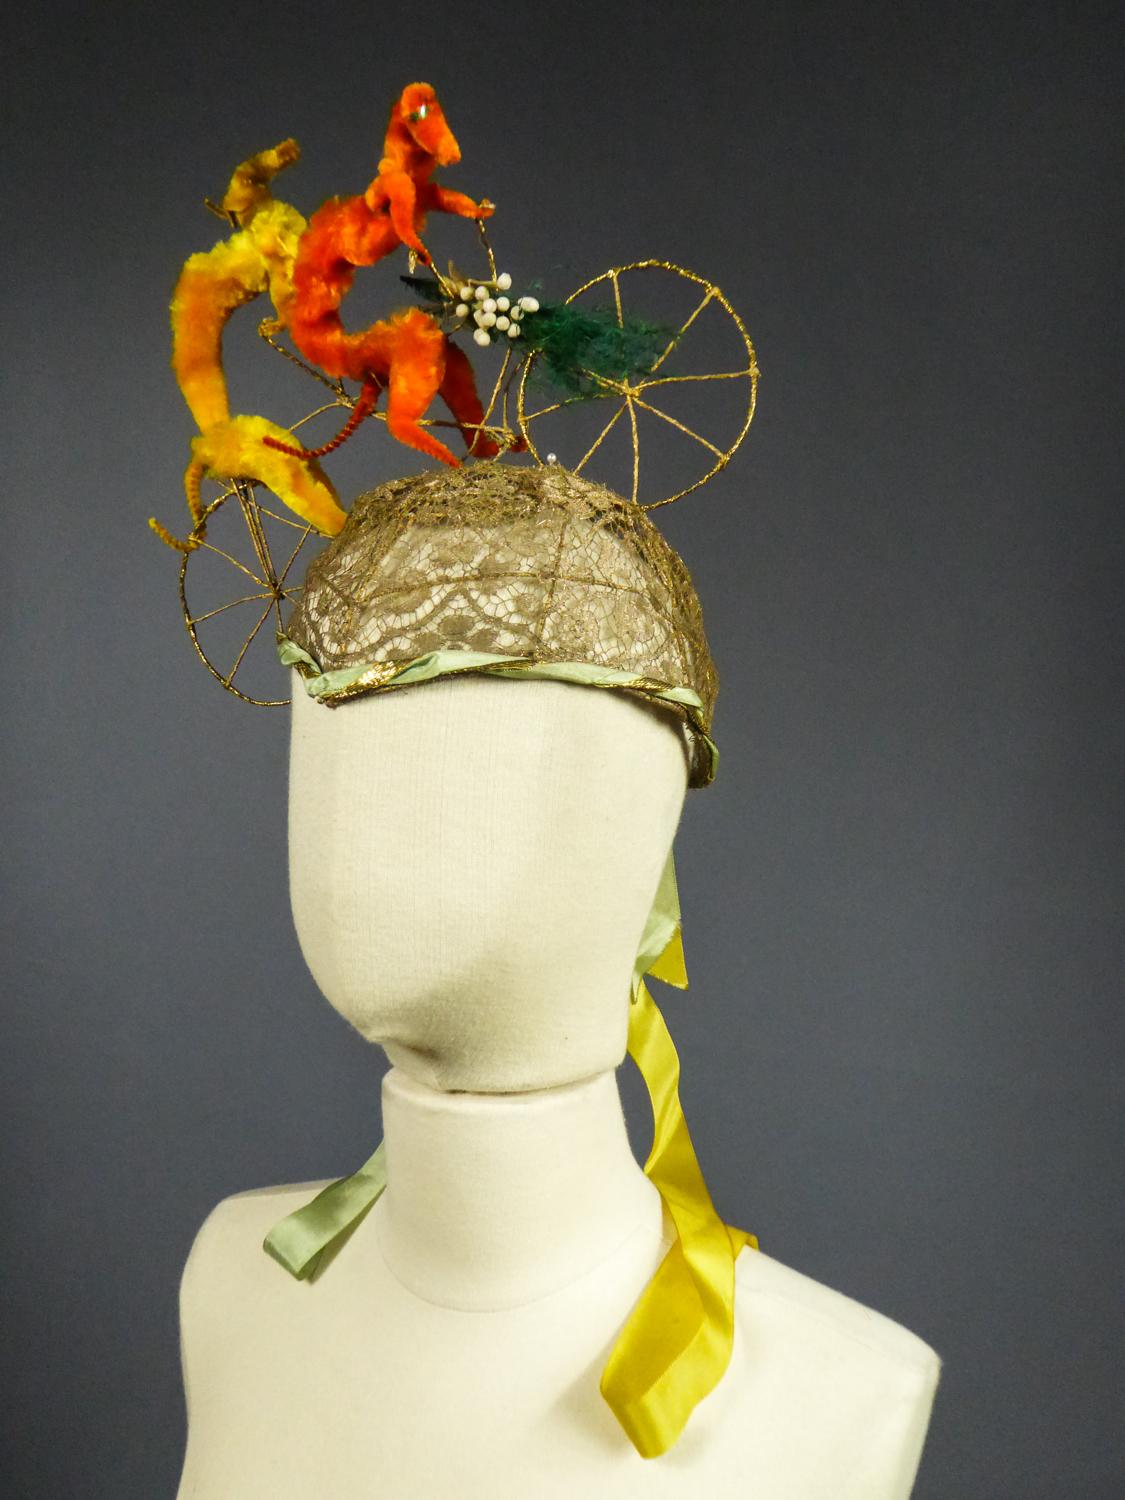 Circa 1920/1930
France

Moving bell-shaped Catherinette headdress surmounted by an astonishing tandem bicycle of plush greyhounds, probably from a Parisian fashion designer house between the two 20th century Worldwars. Elaborate work of a